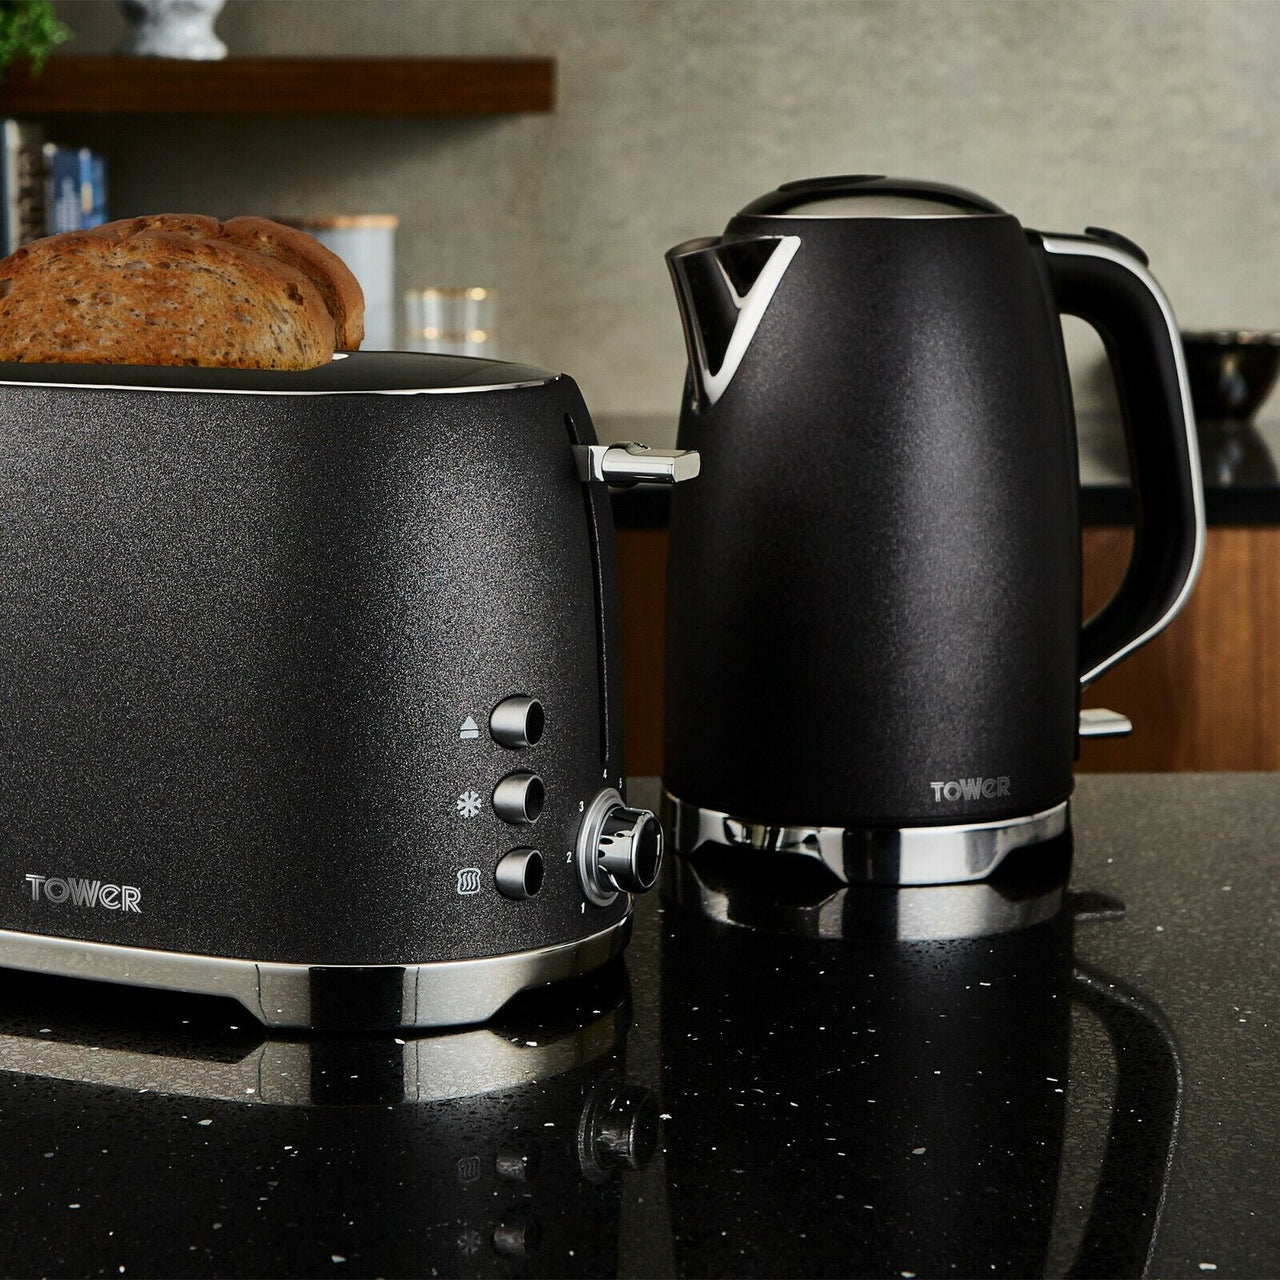 Glitz Kettle 2-Slice Toaster Bread Bin Canisters & Microwave Set of 5 in Black